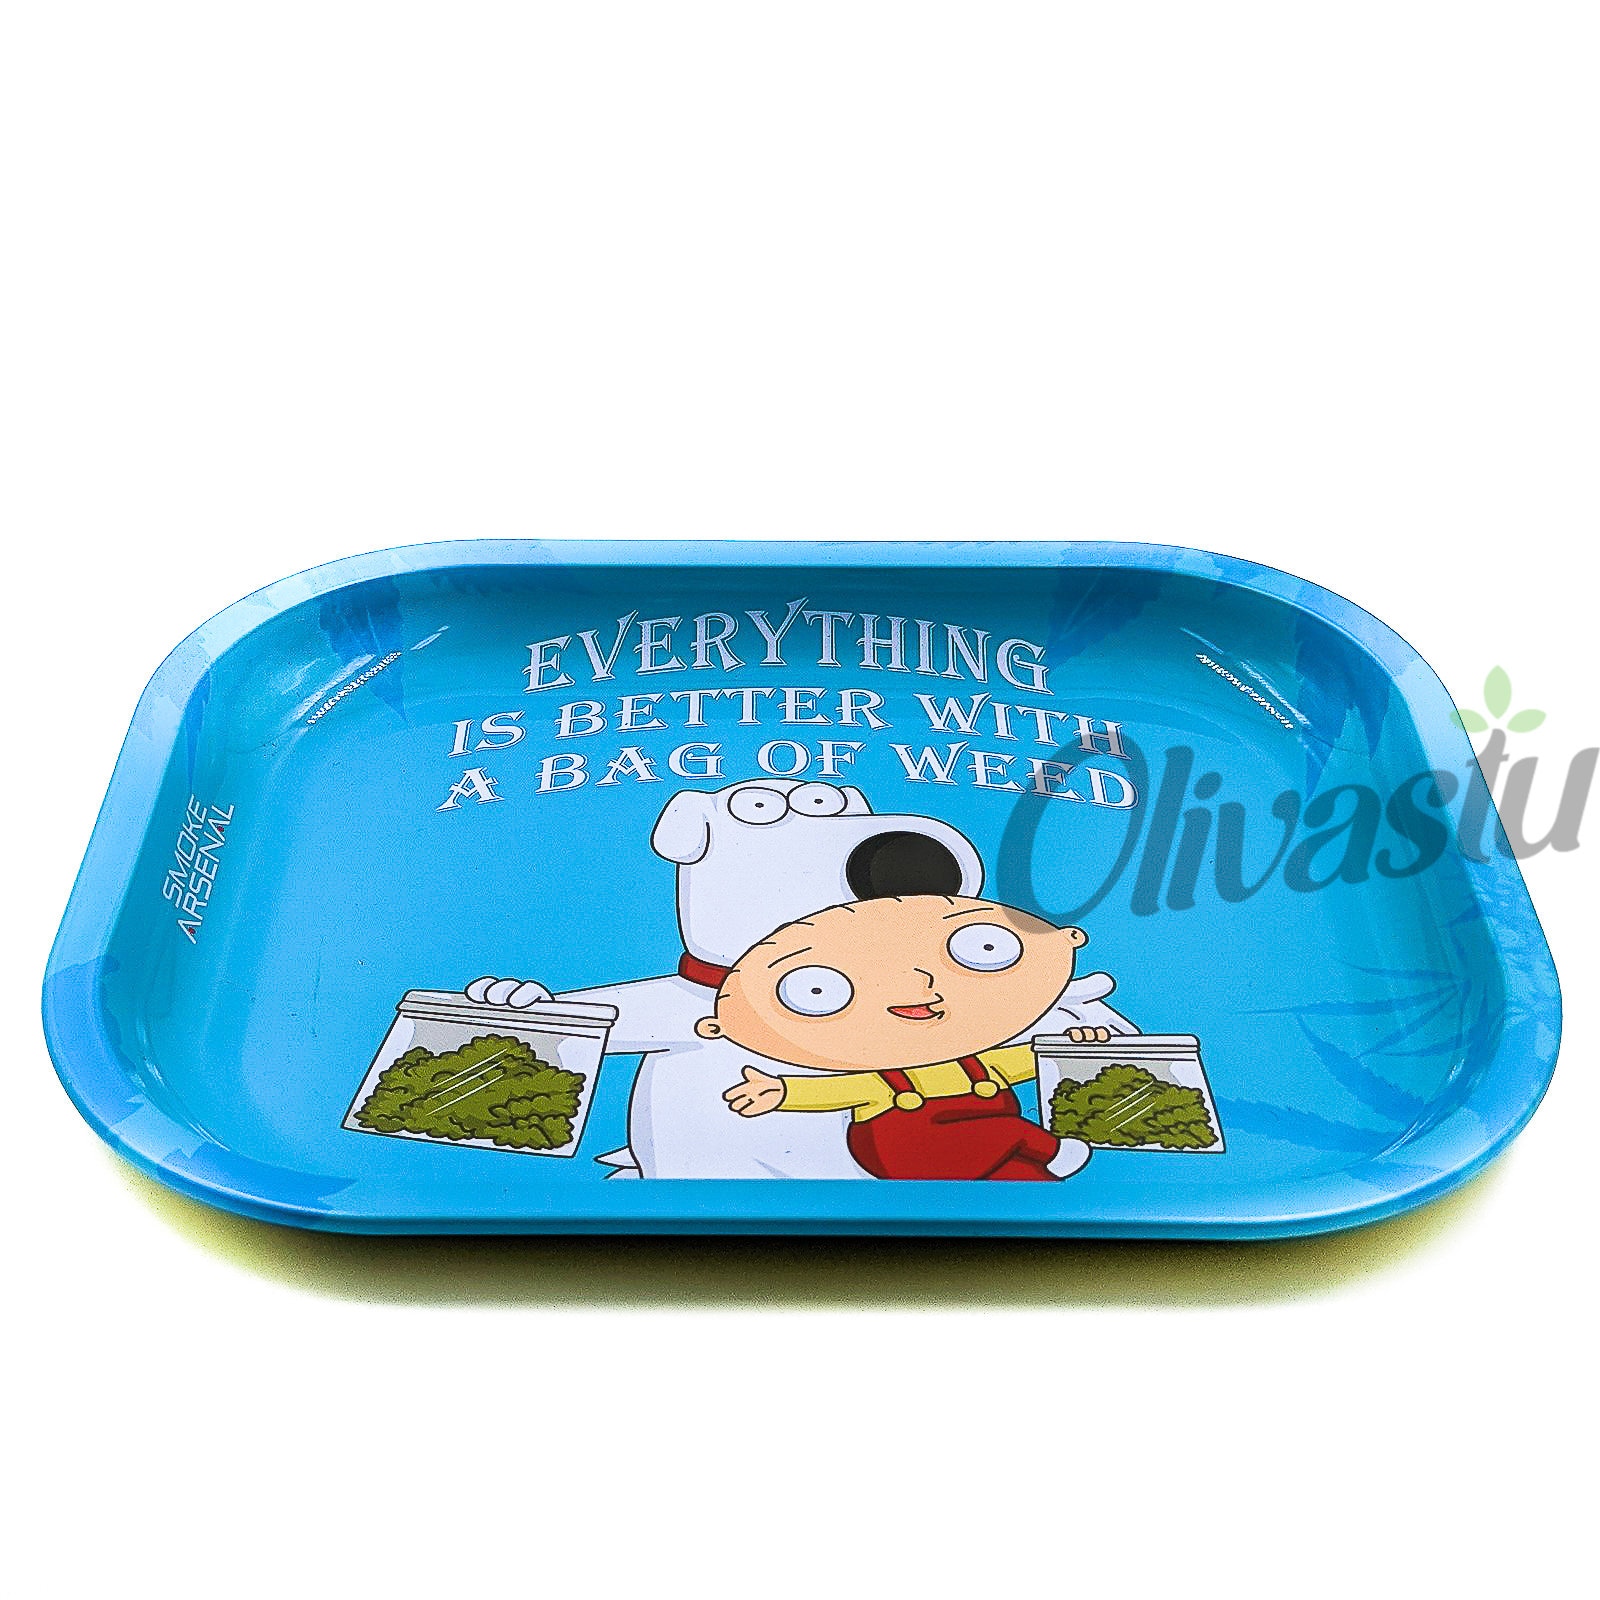 il fullxfull.4456467468 29sy 1 - Rolling Tray Shop